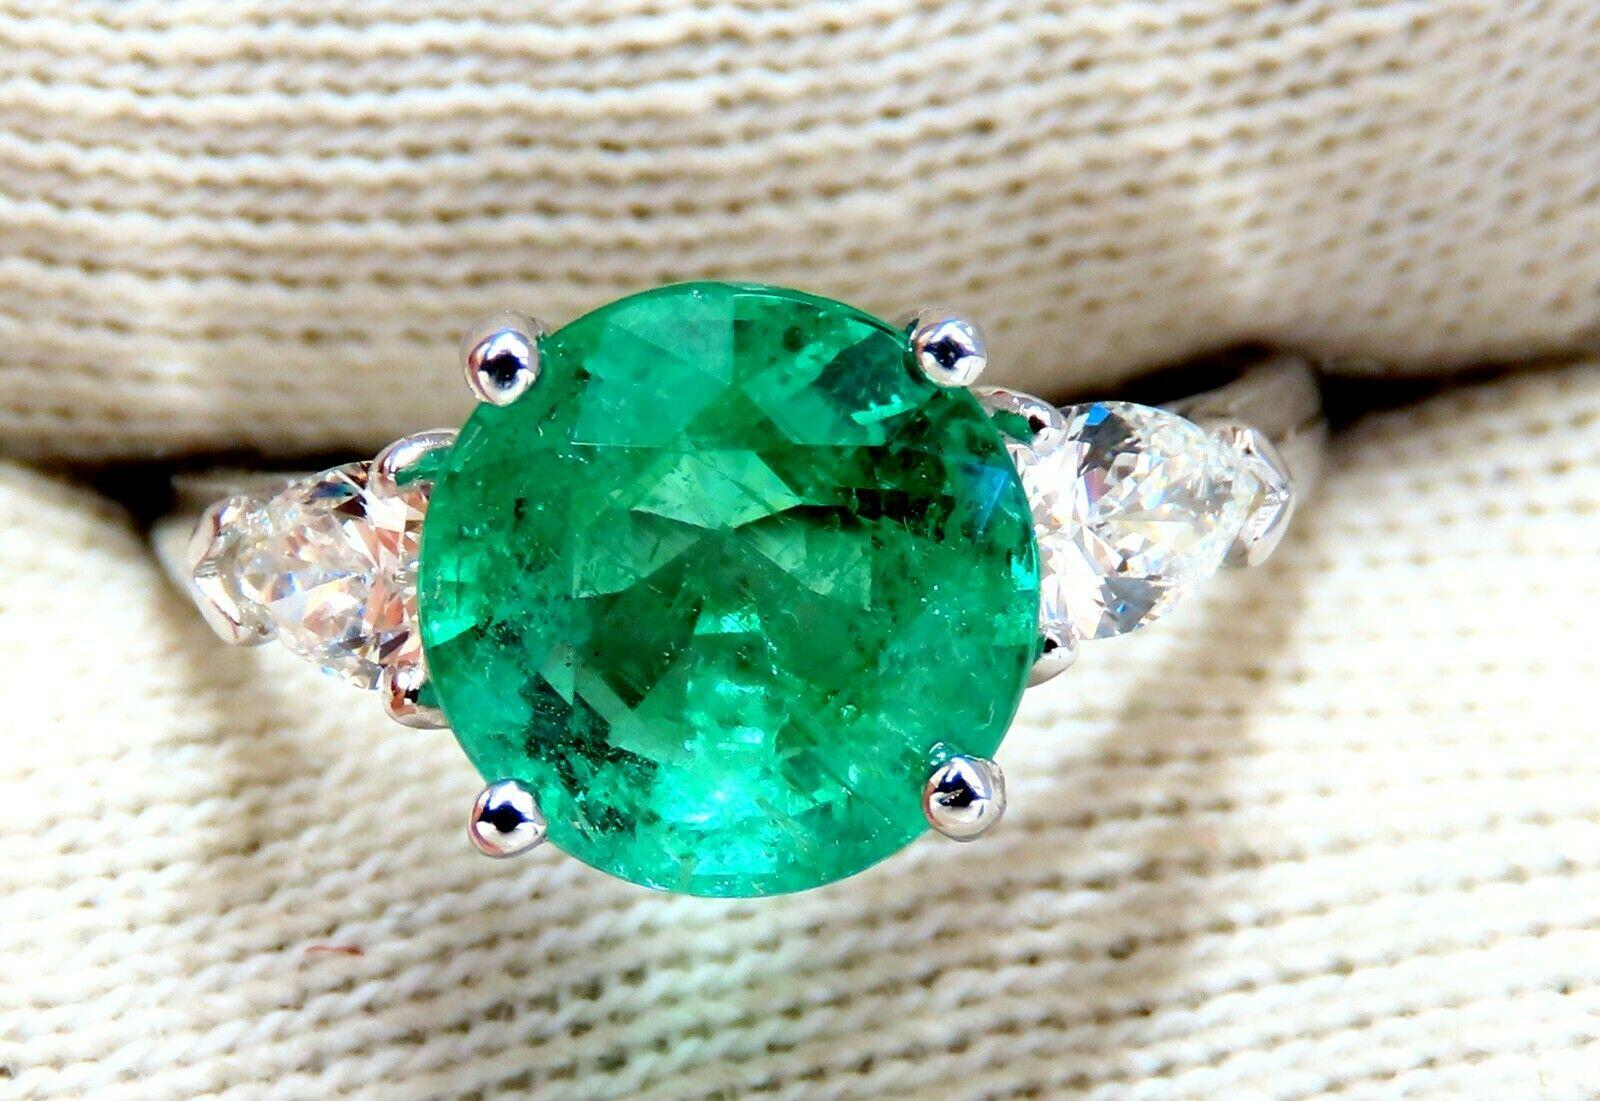 Prime Three Stone Mint Green.

3.03ct. Natural Emerald Ring

Emerald, Round Brilliant cut

9mm Diameter

Transparent & Vivid Green 

.50ct. Diamonds.

Pears & full cuts 

G-color Vs-2 clarity.  

14kt. white gold

3.2 grams

Ring Current size: